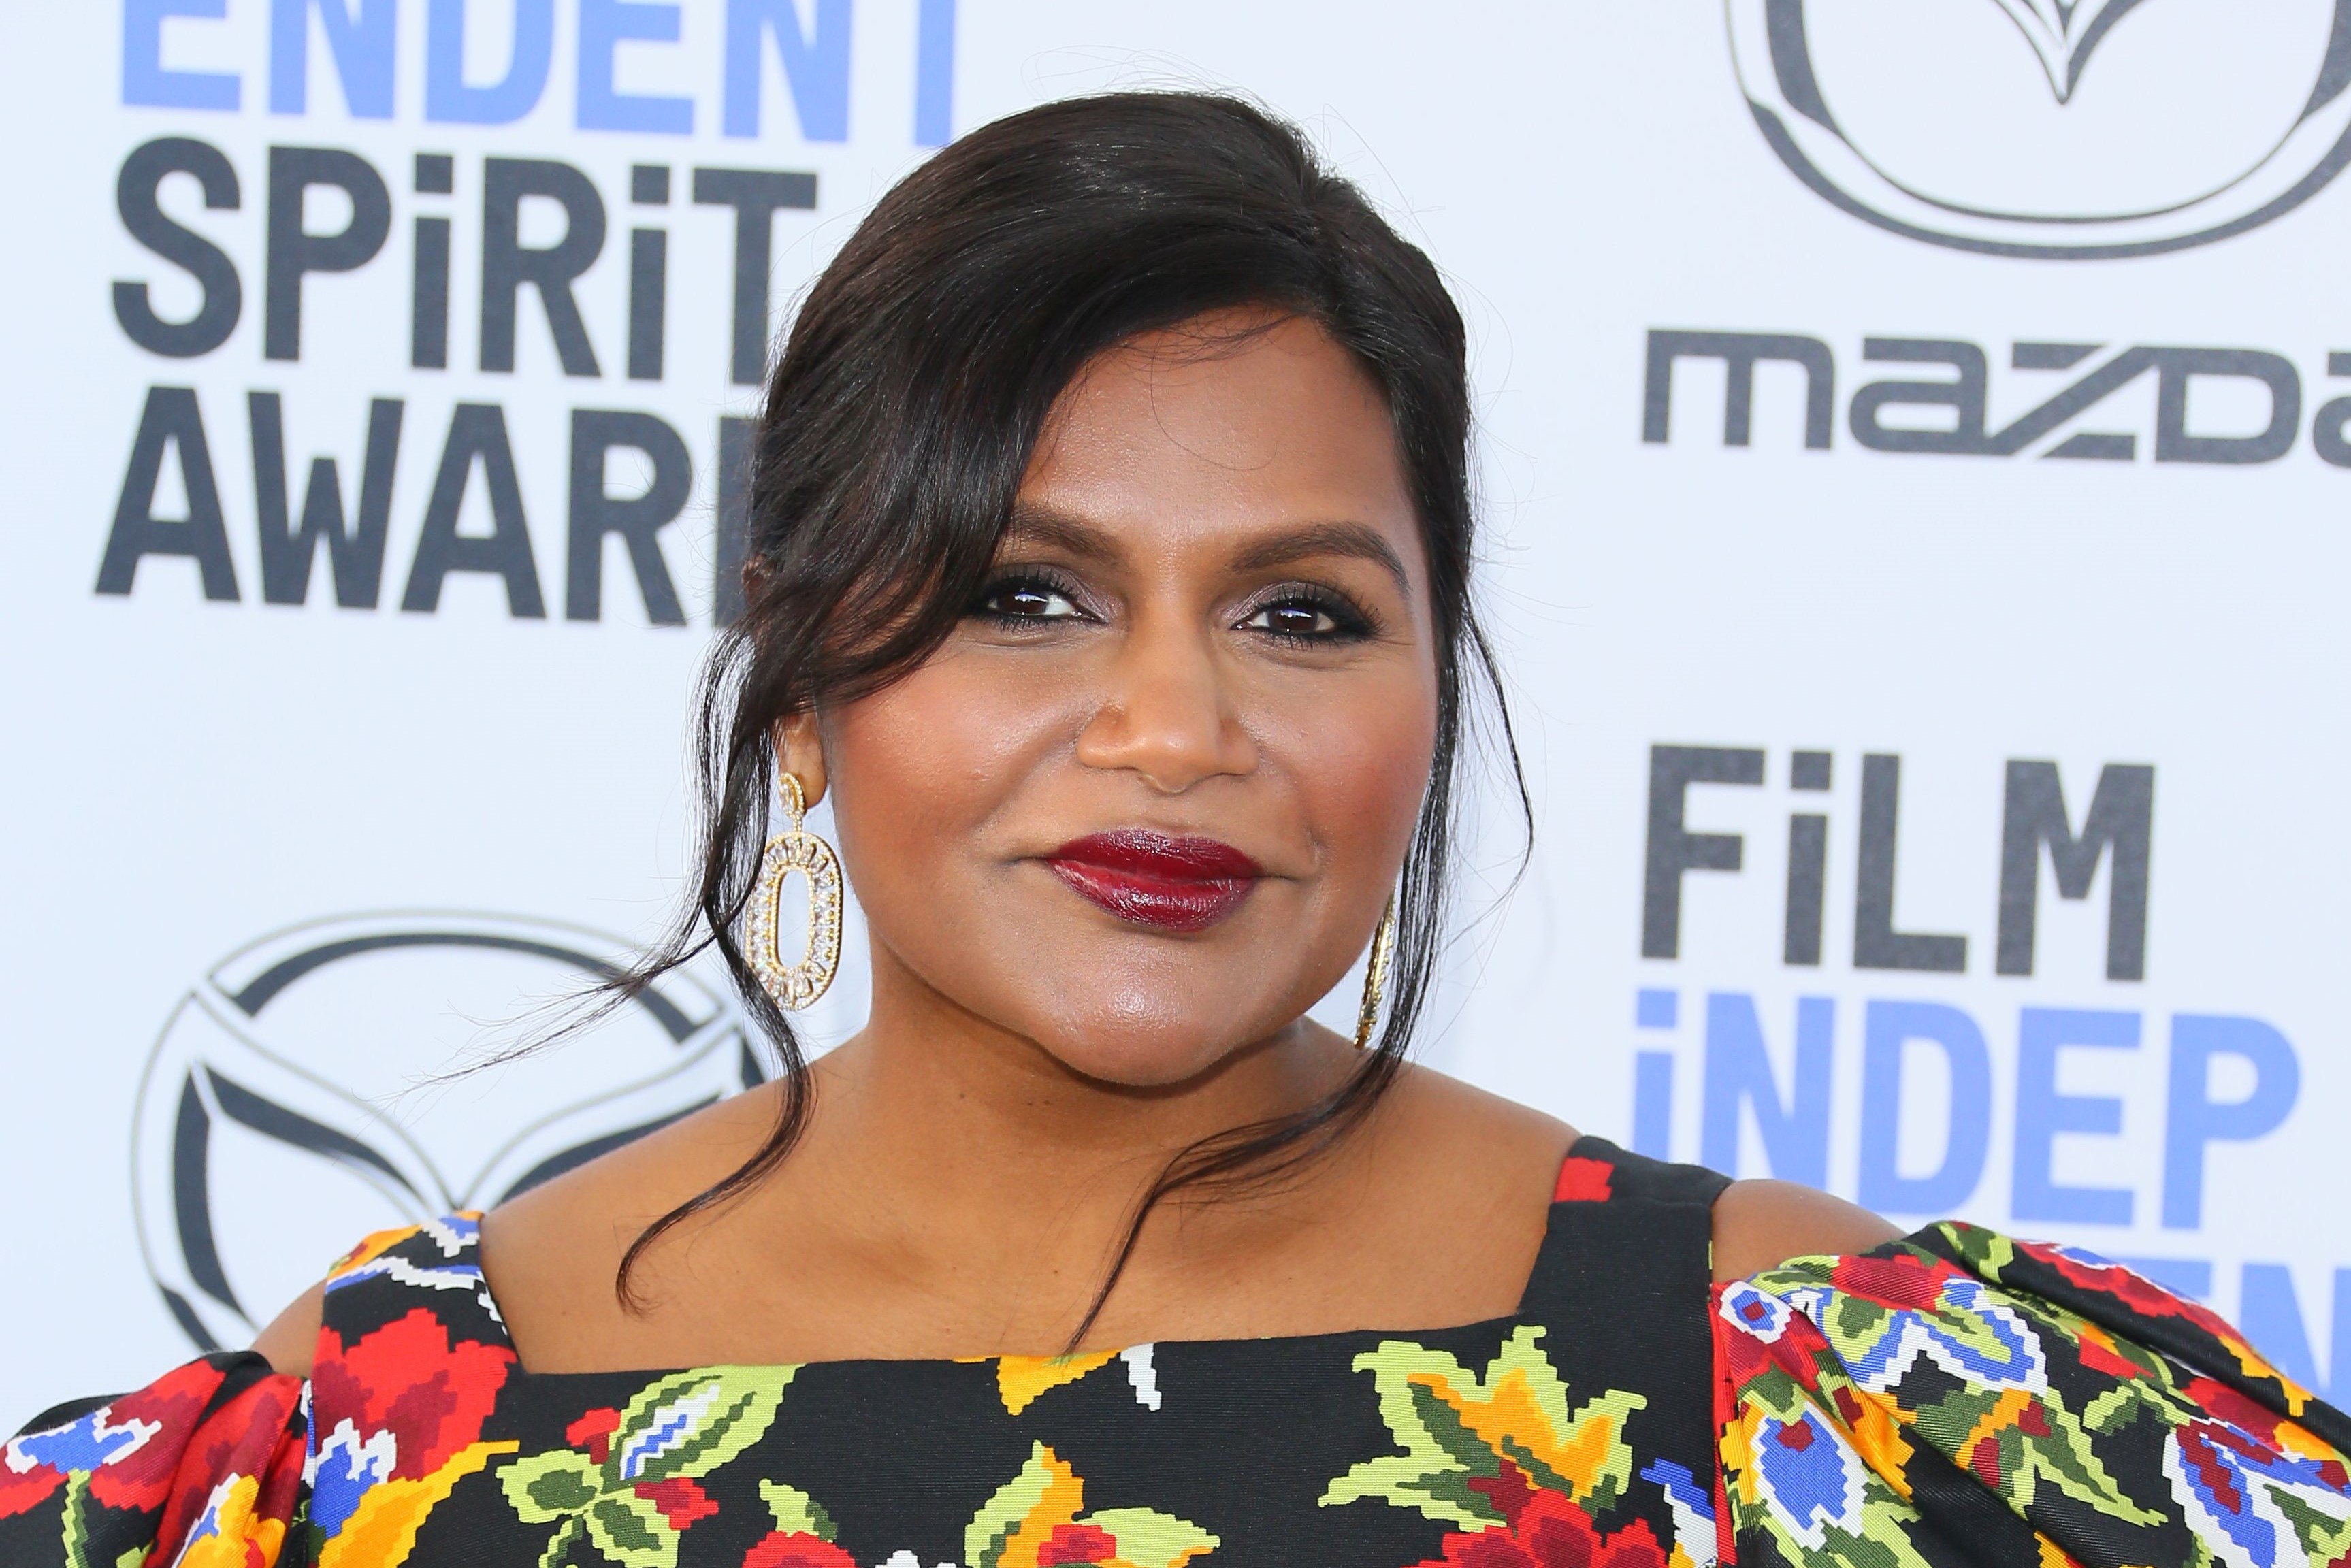 US actress Mindy Kaling arrives for the 35th Film Independent Spirit Awards in Santa Monica, California, on February 8, 2020.